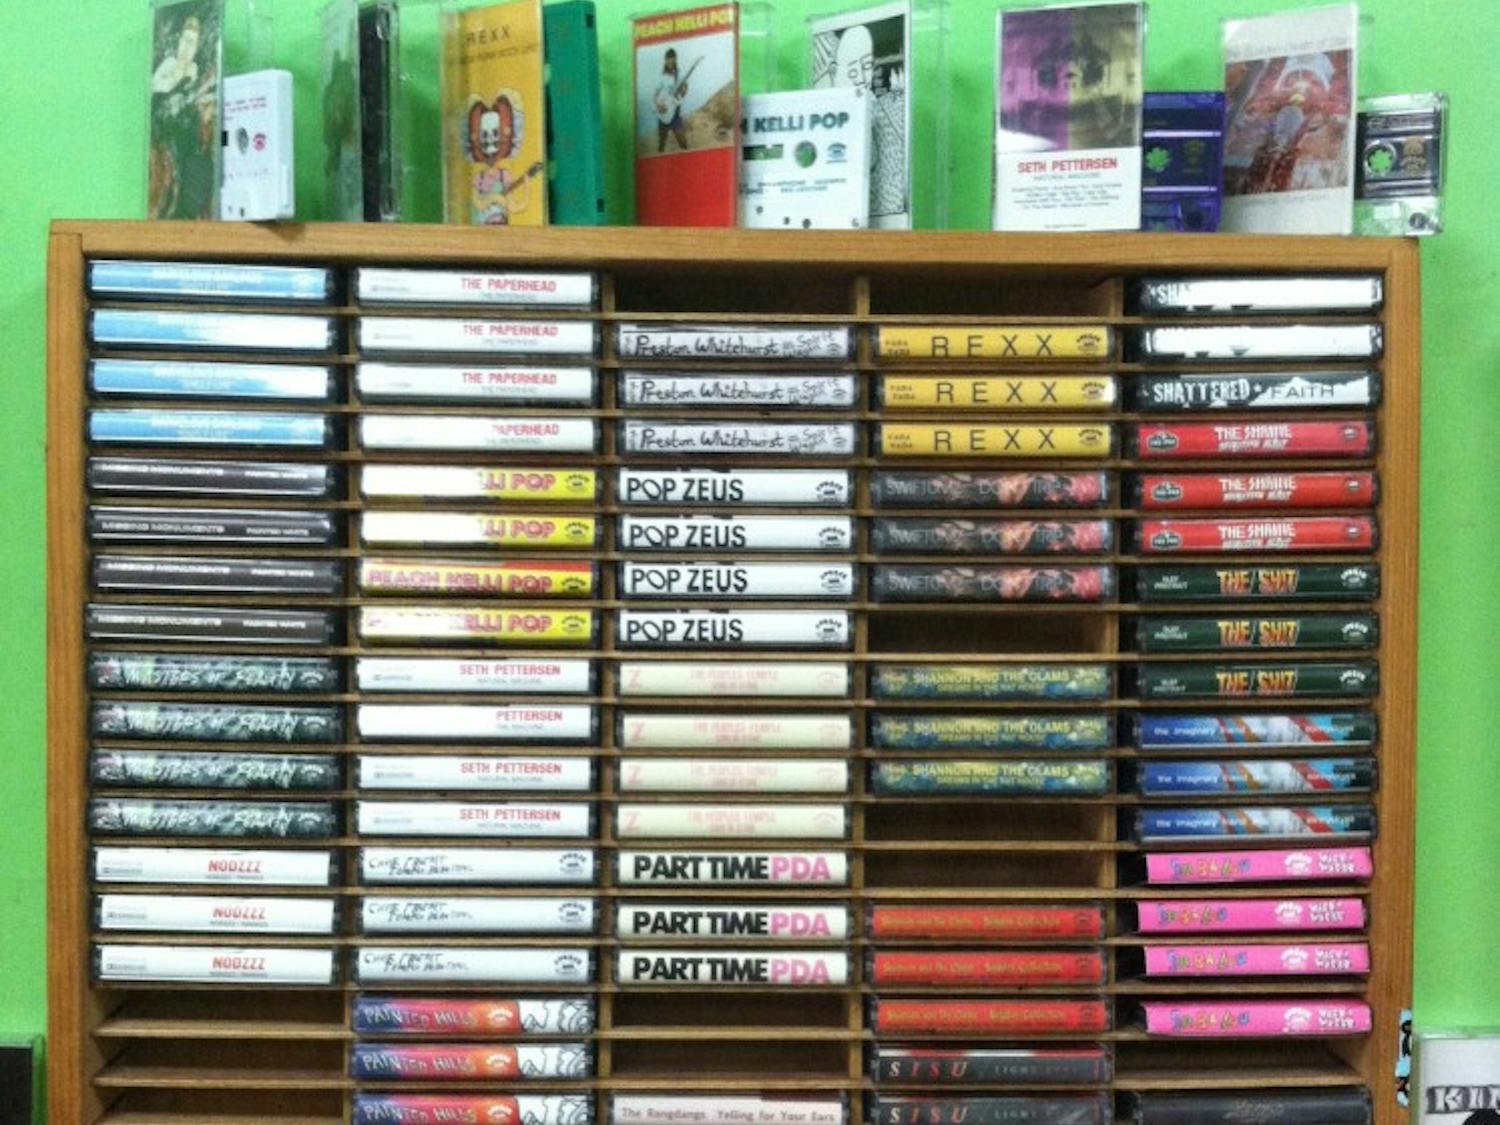 Racks of cassette tapes are found at Burger Records  in Fullerton Calif. Many bands that Burger Records carries intentionally release music on cassette tapes because of their rising popularity. (Photo by Maggie Spear) 